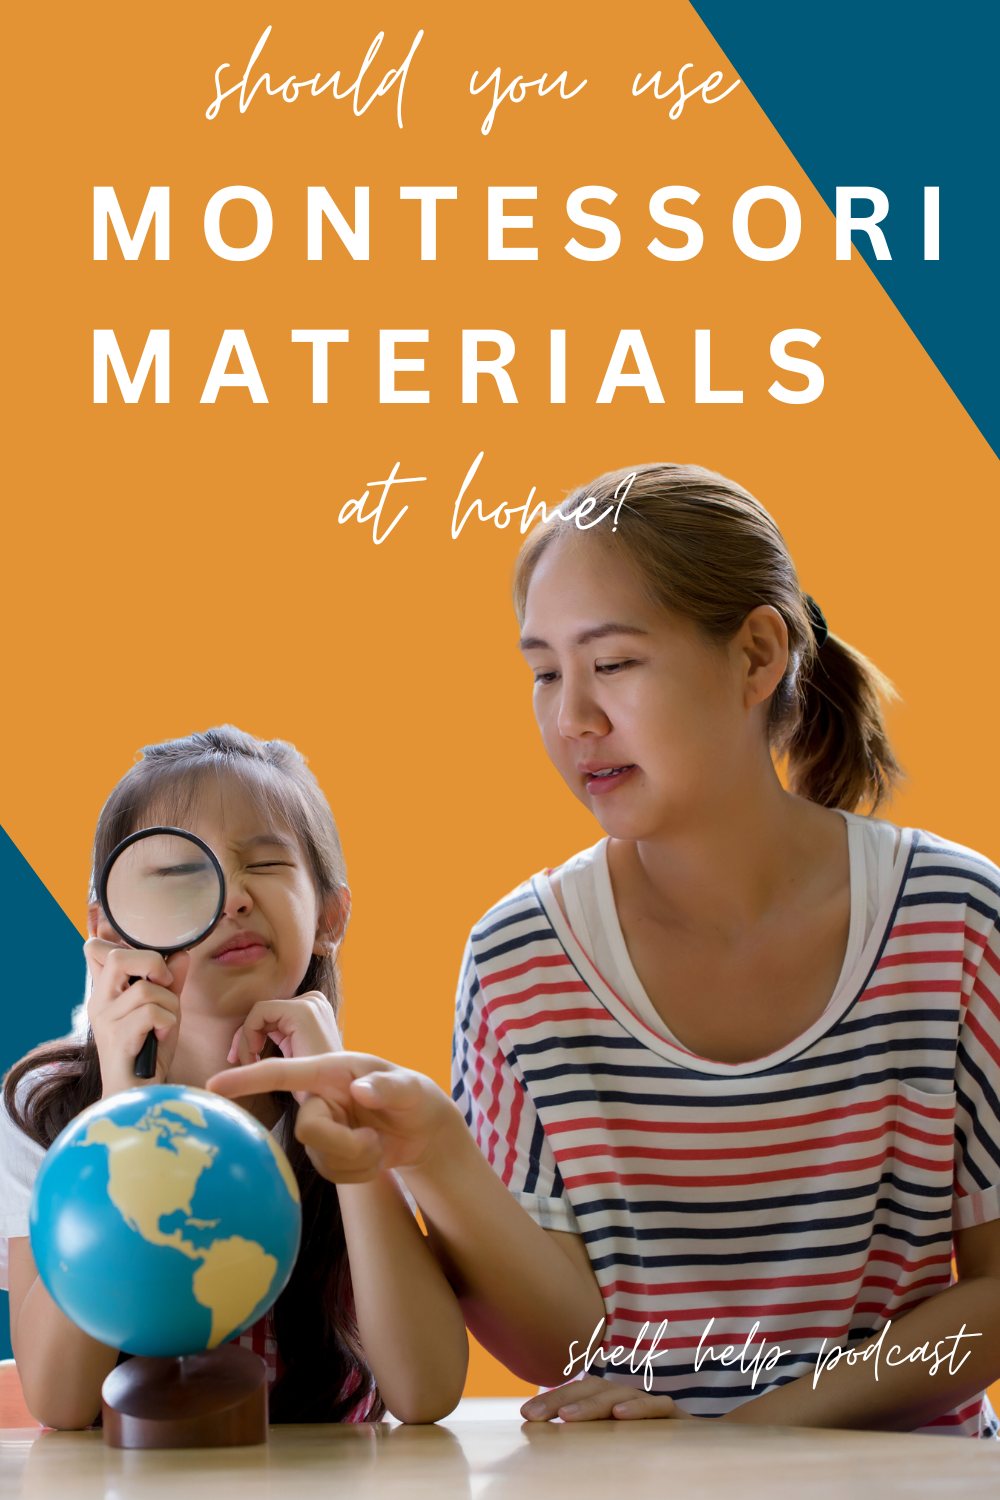 Want a Montessori learning material at home? Consider these pros and cons before buying anything. In this Montessori parenting podcast we talk about which materials we like at home and which to skip. Listen here to find out.